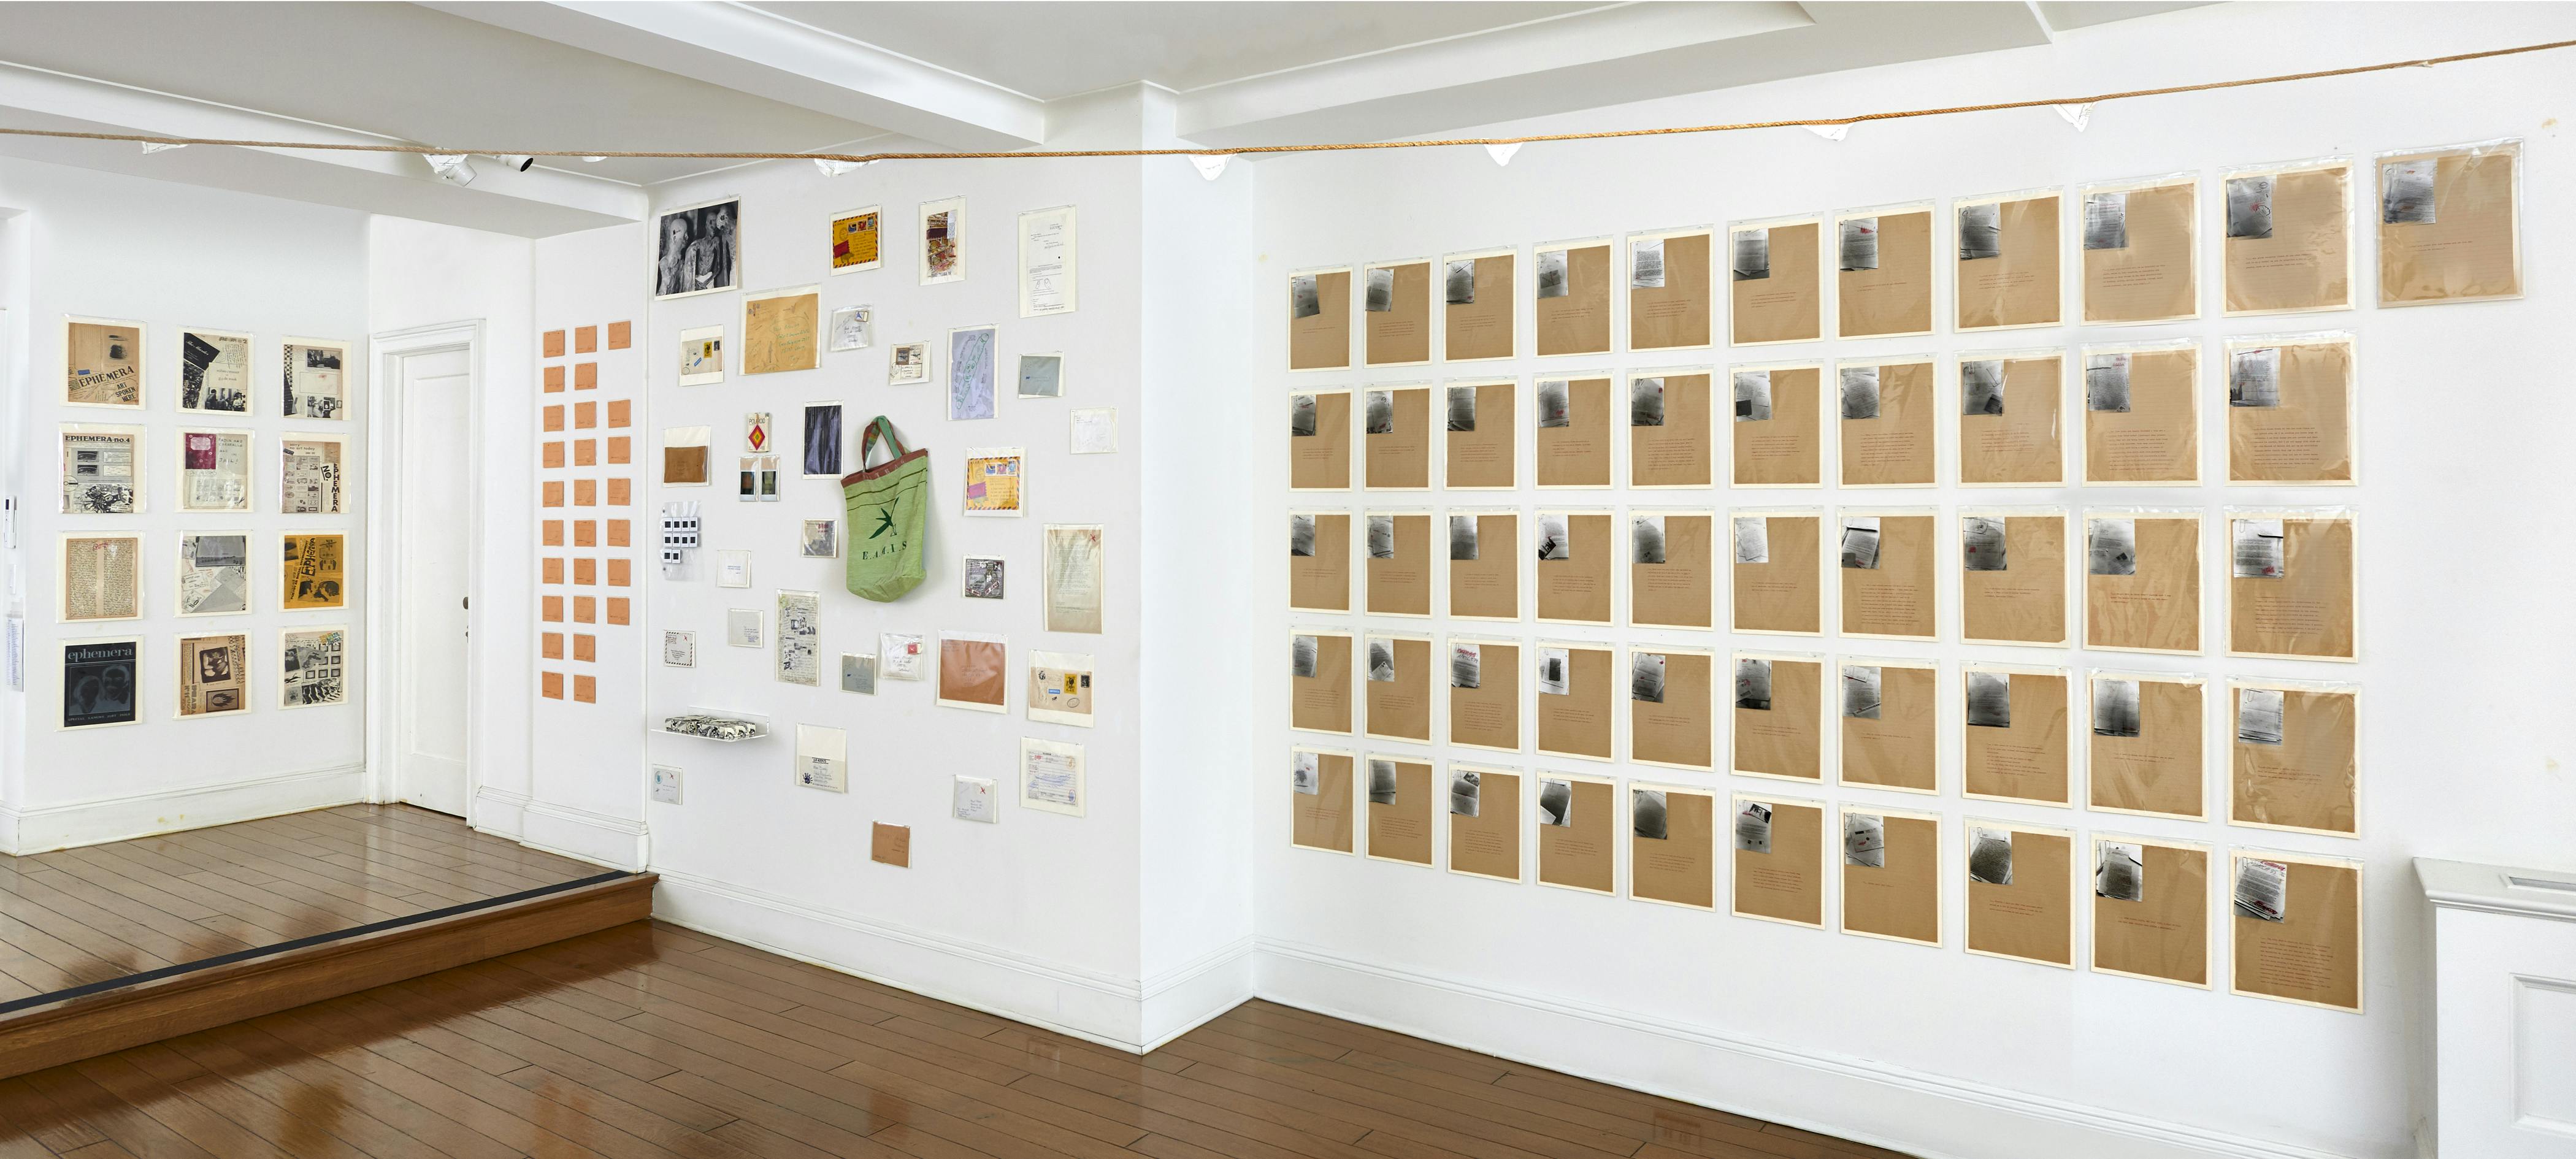 Installation view of Ulises Carrión: The Big Monster exhibition showing a large amount of wall-mounted works.